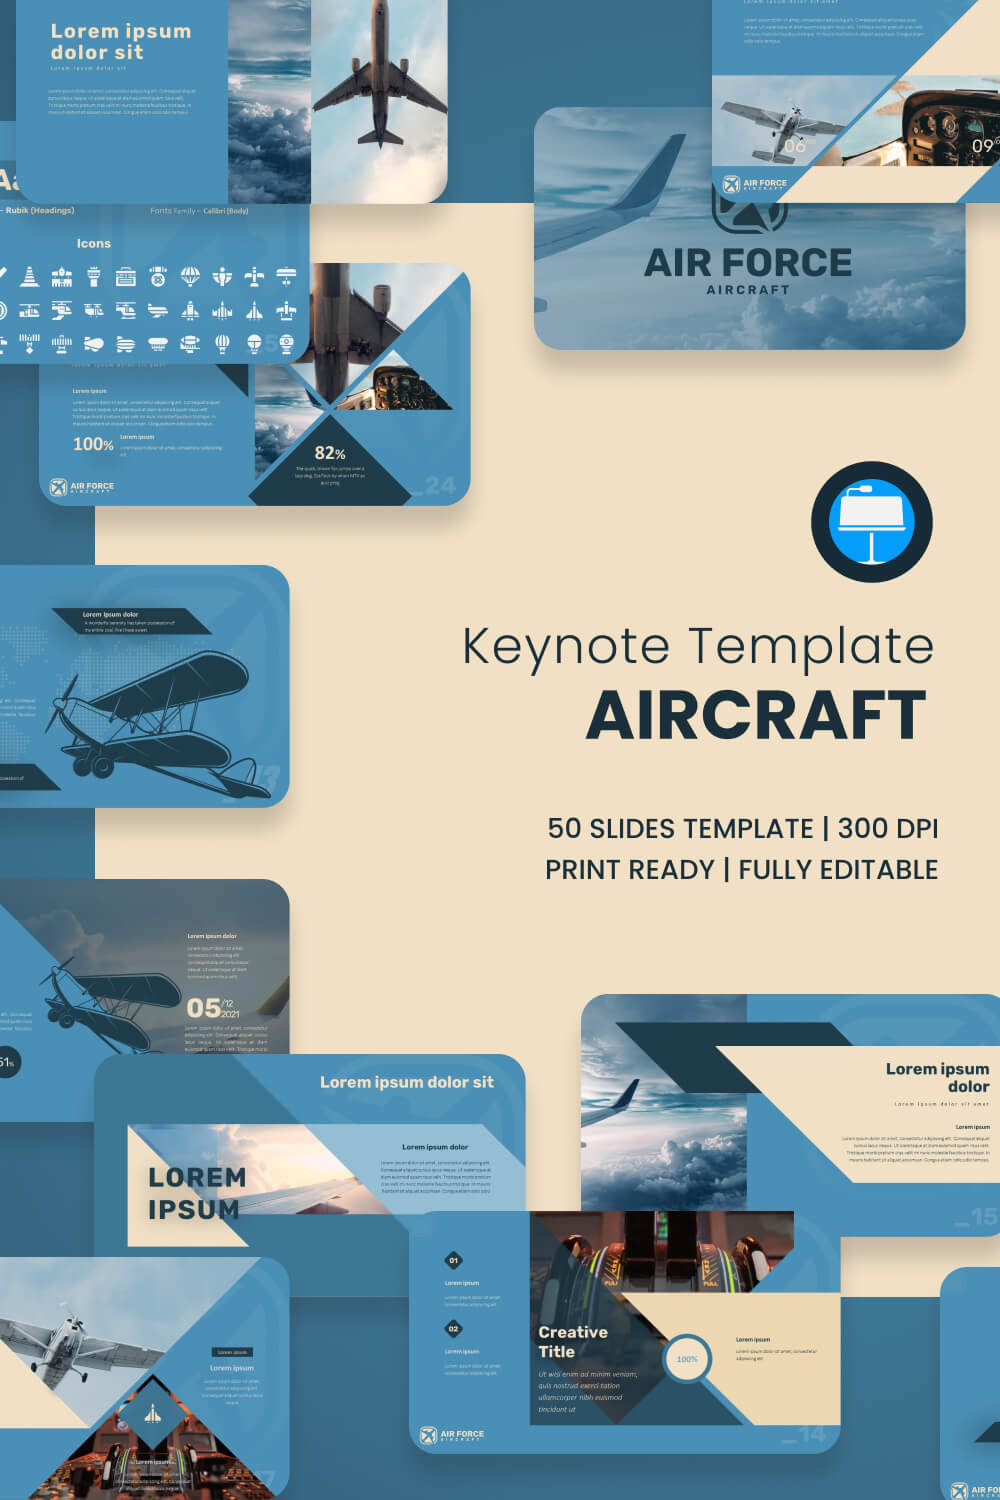 AirForce Military Keynote Template pinterest.